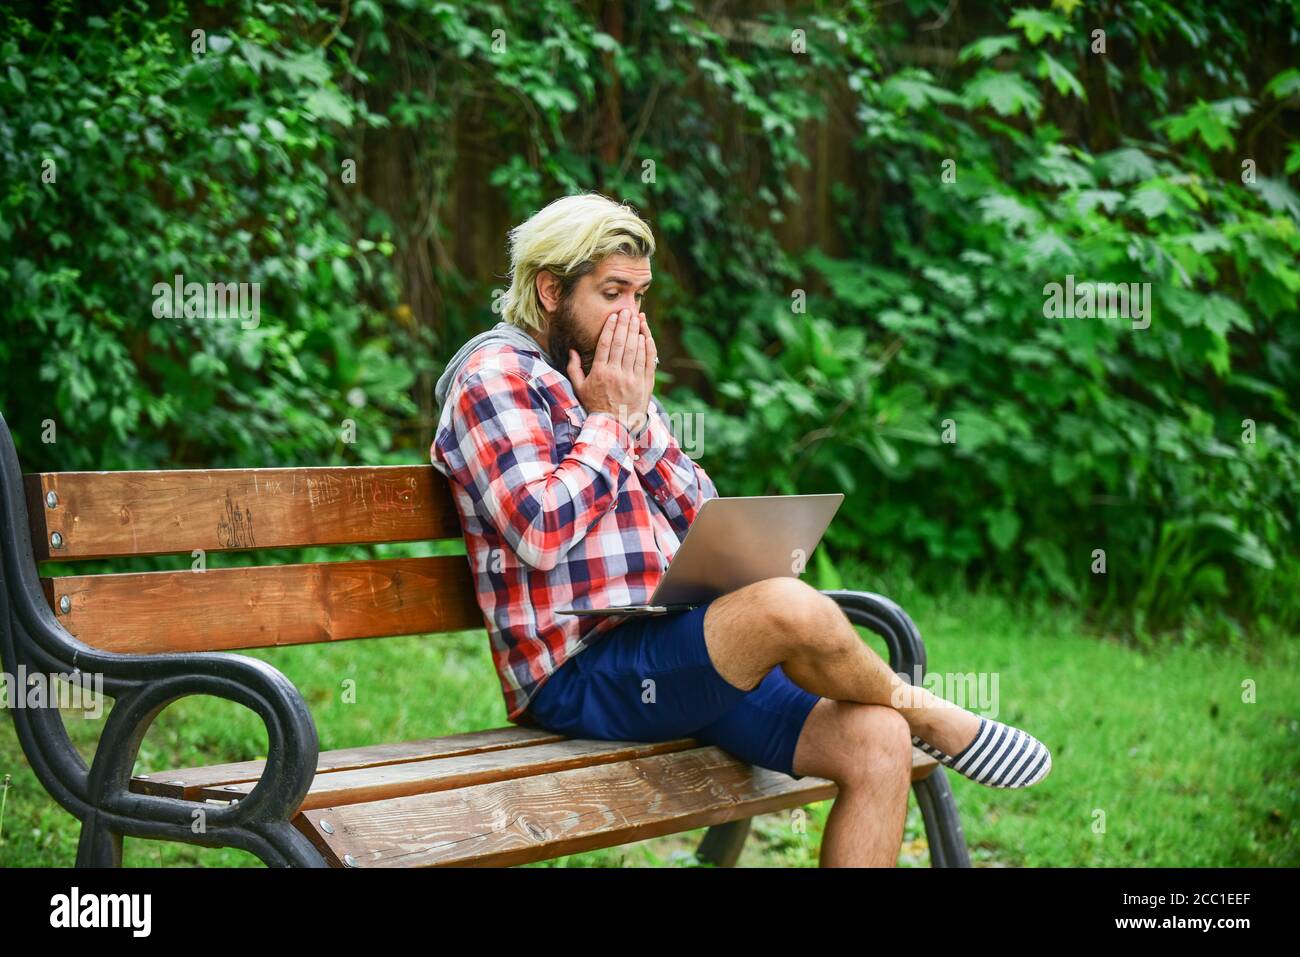 Fresh air. Mobile internet. Working online. Hipster inspired work in park. Modern laptop. Remote job. Online shopping. Agile business. Bearded guy sit bench park nature background. Work and relax. Stock Photo